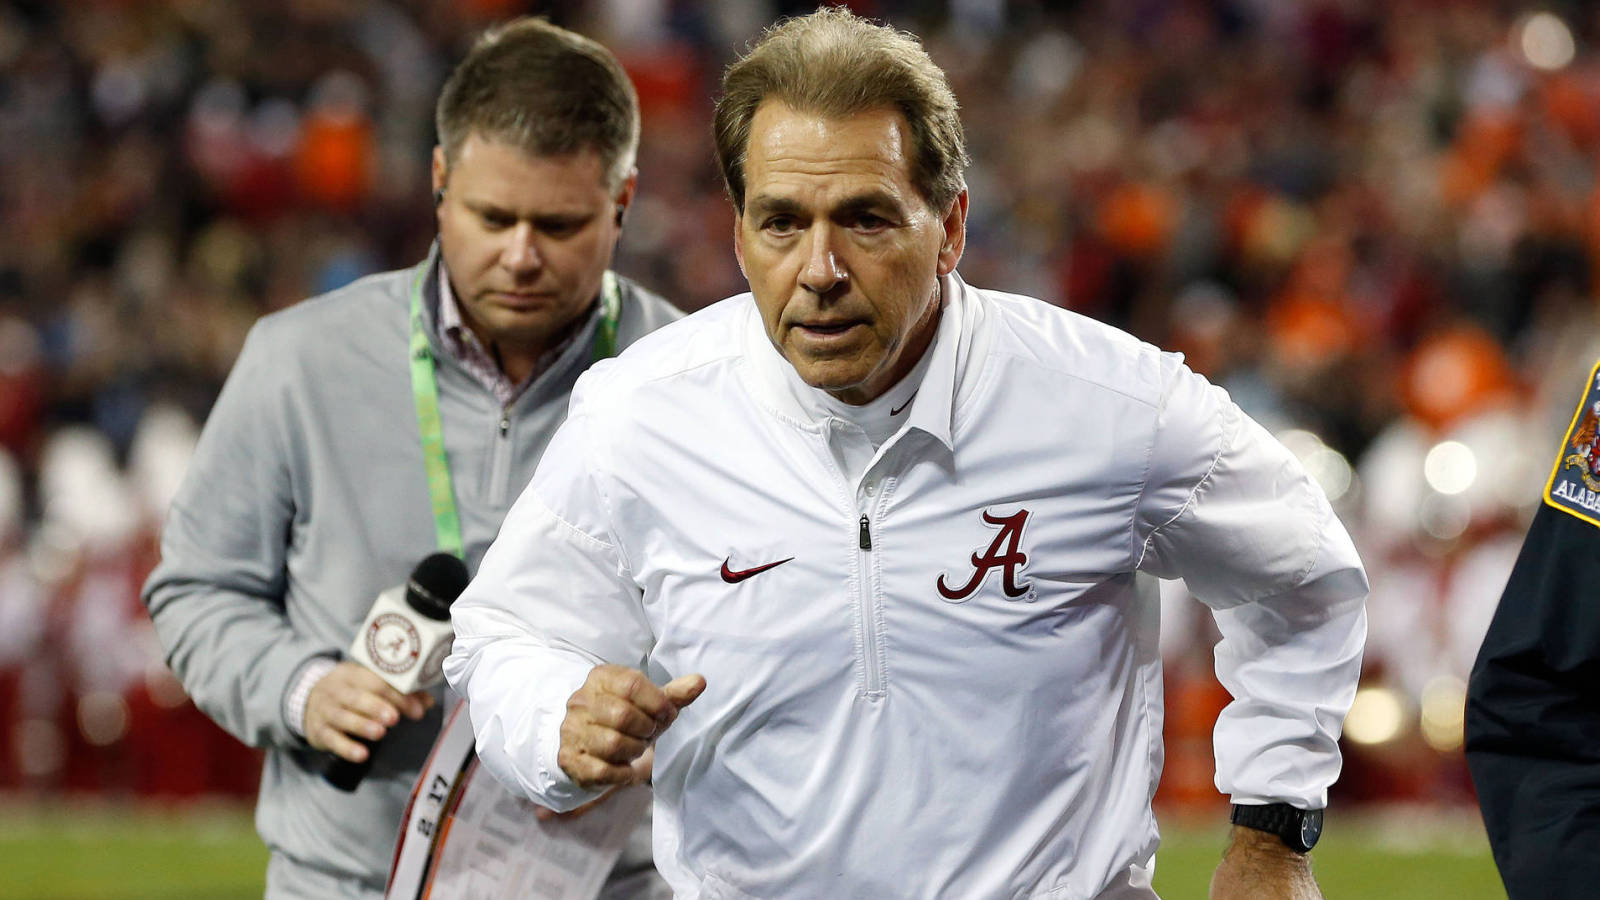 Nick Saban has no time for this solar eclipse stuff